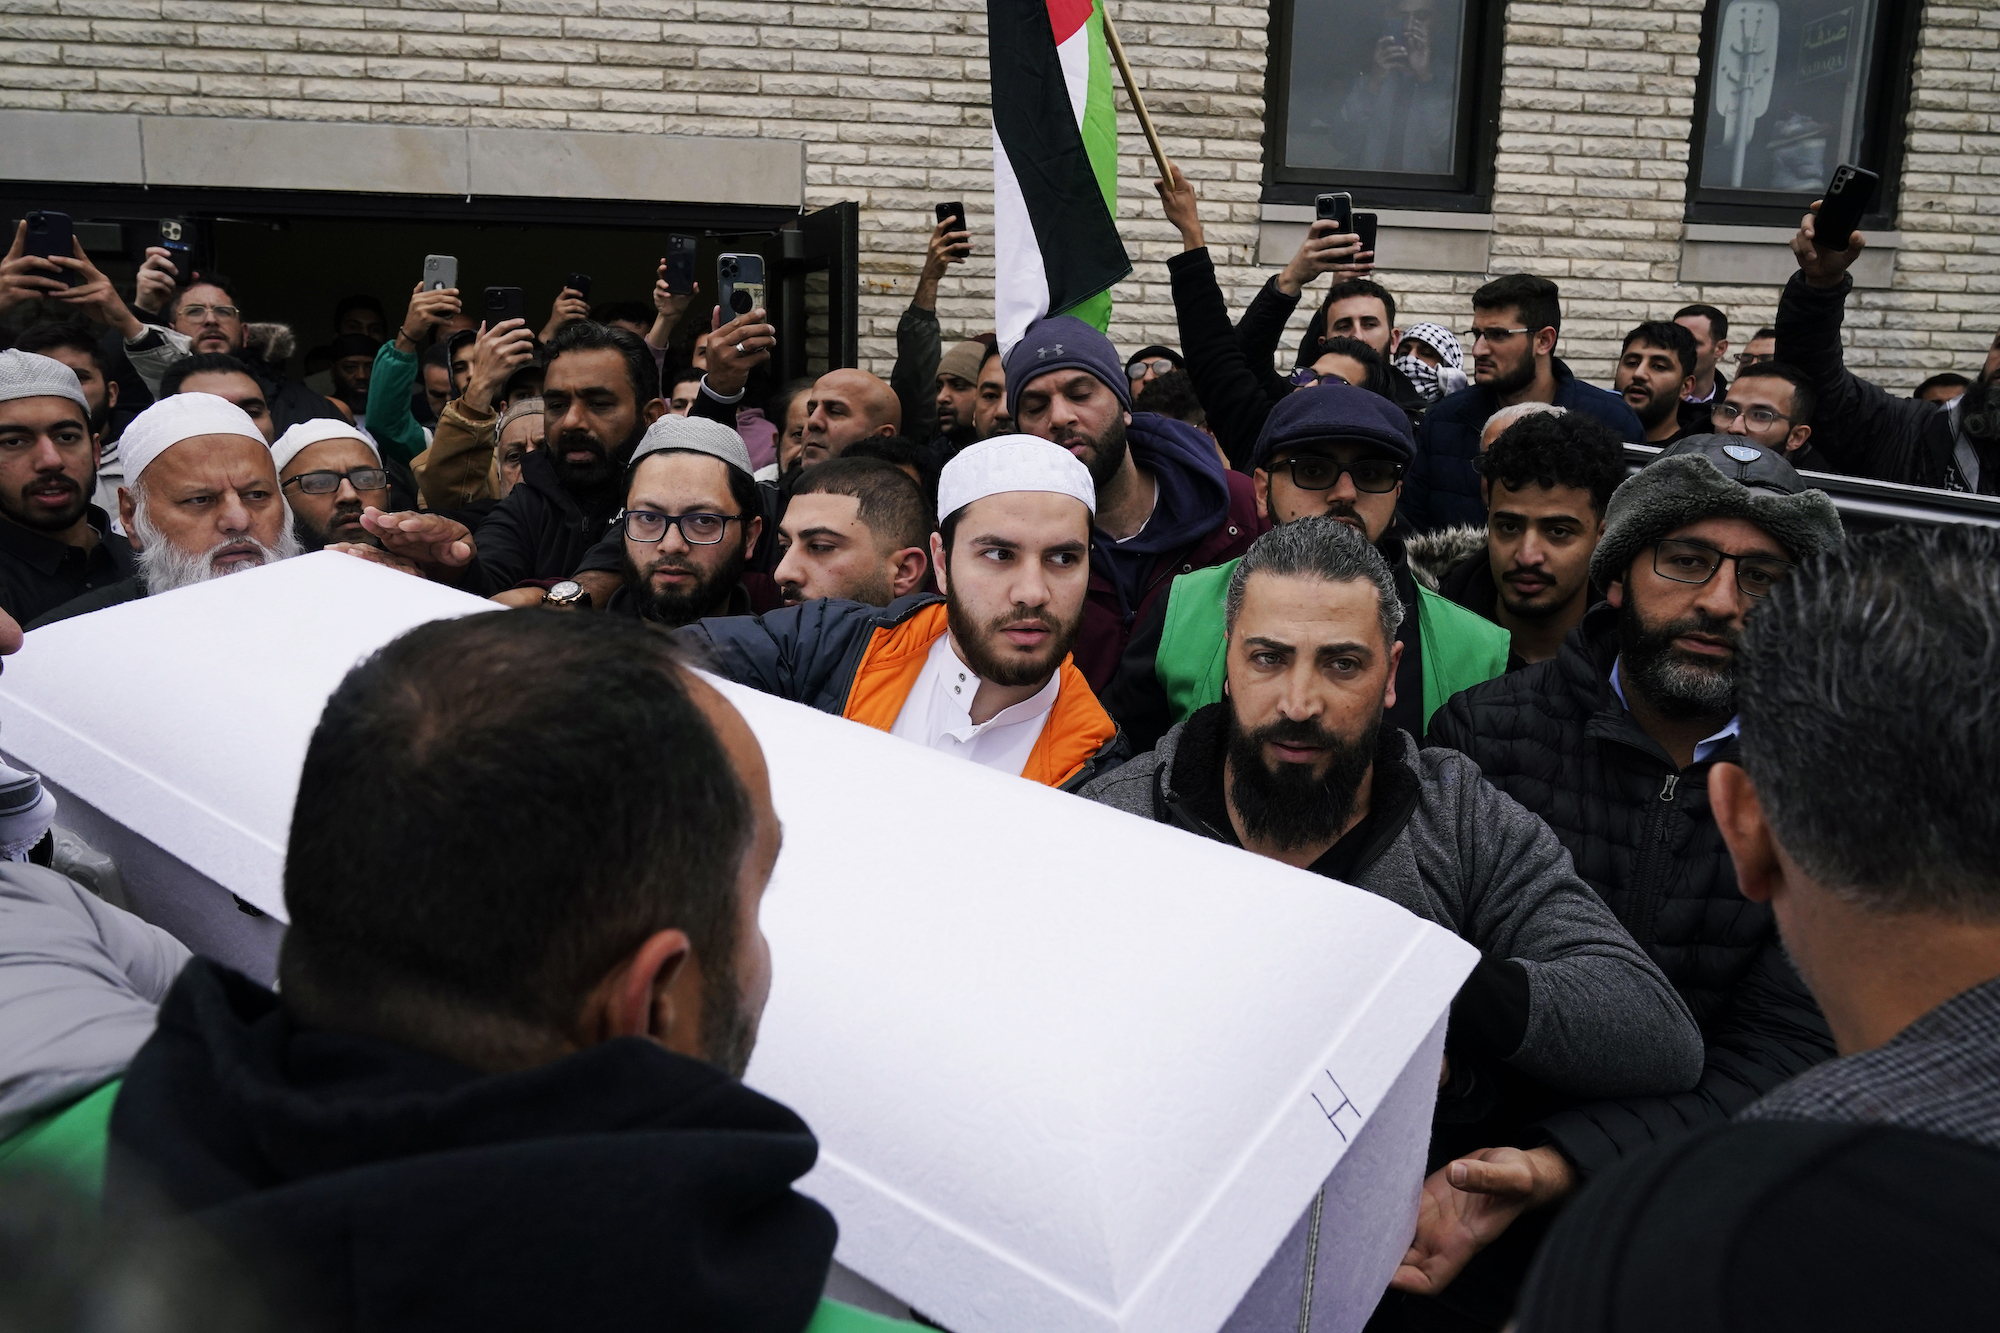 Family members of Wadea Al Fayoume, a six year-old who was stabbed to death, bring out his casket from Mosque Foundation to the hearse in Bridgeview, Illinois, on October 16.